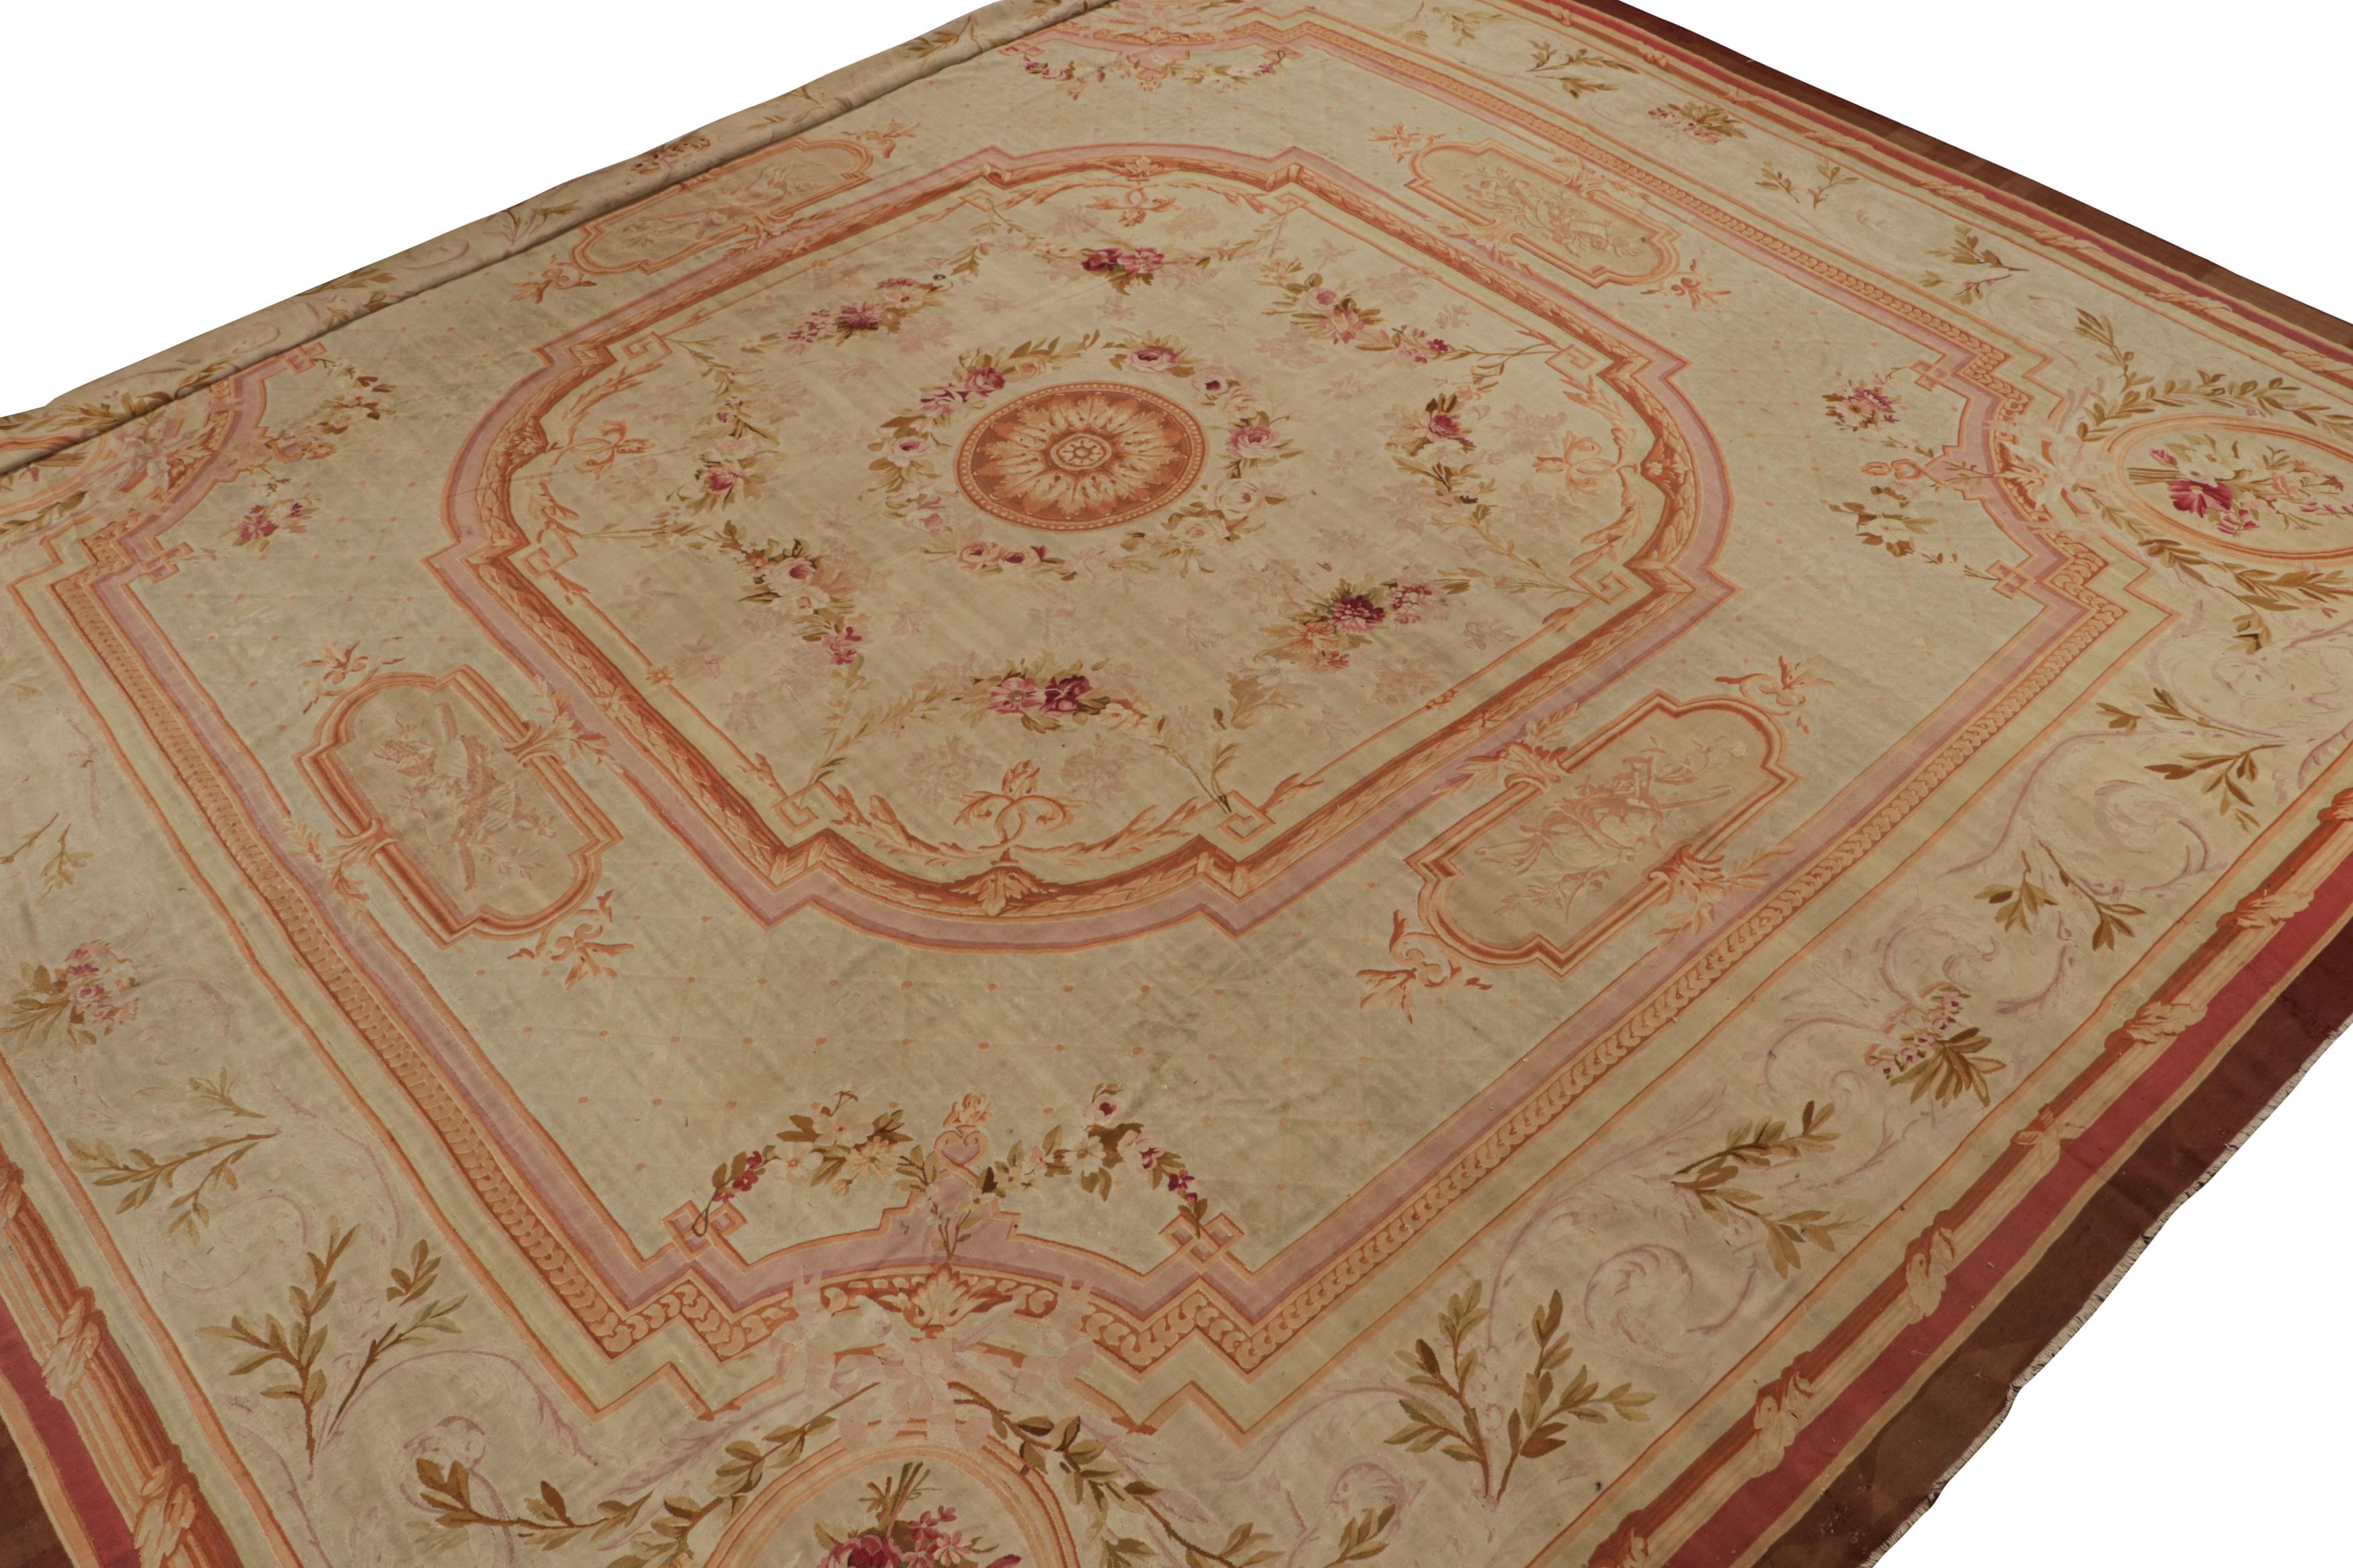 Handwoven in wool circa 1890-1900, this 17x17 antique Aubusson flatweave and square rug is a rare turn-of-the-19th-century masterpiece. Its design features rich red, pink and brown architectural borders around a cream field with floral patterns in